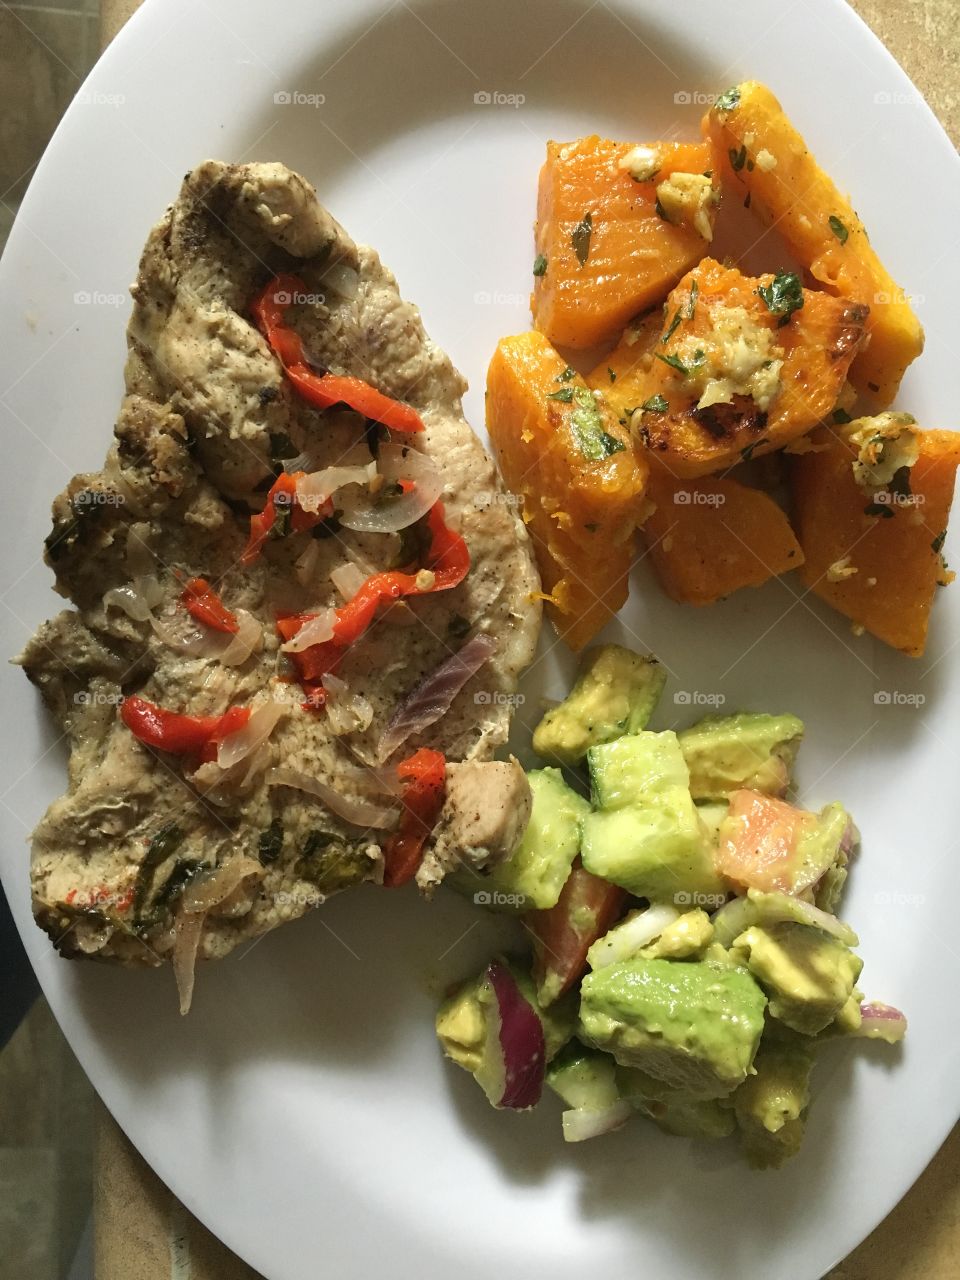 Steamed pork chop,butternut squashed and avocado 🥑